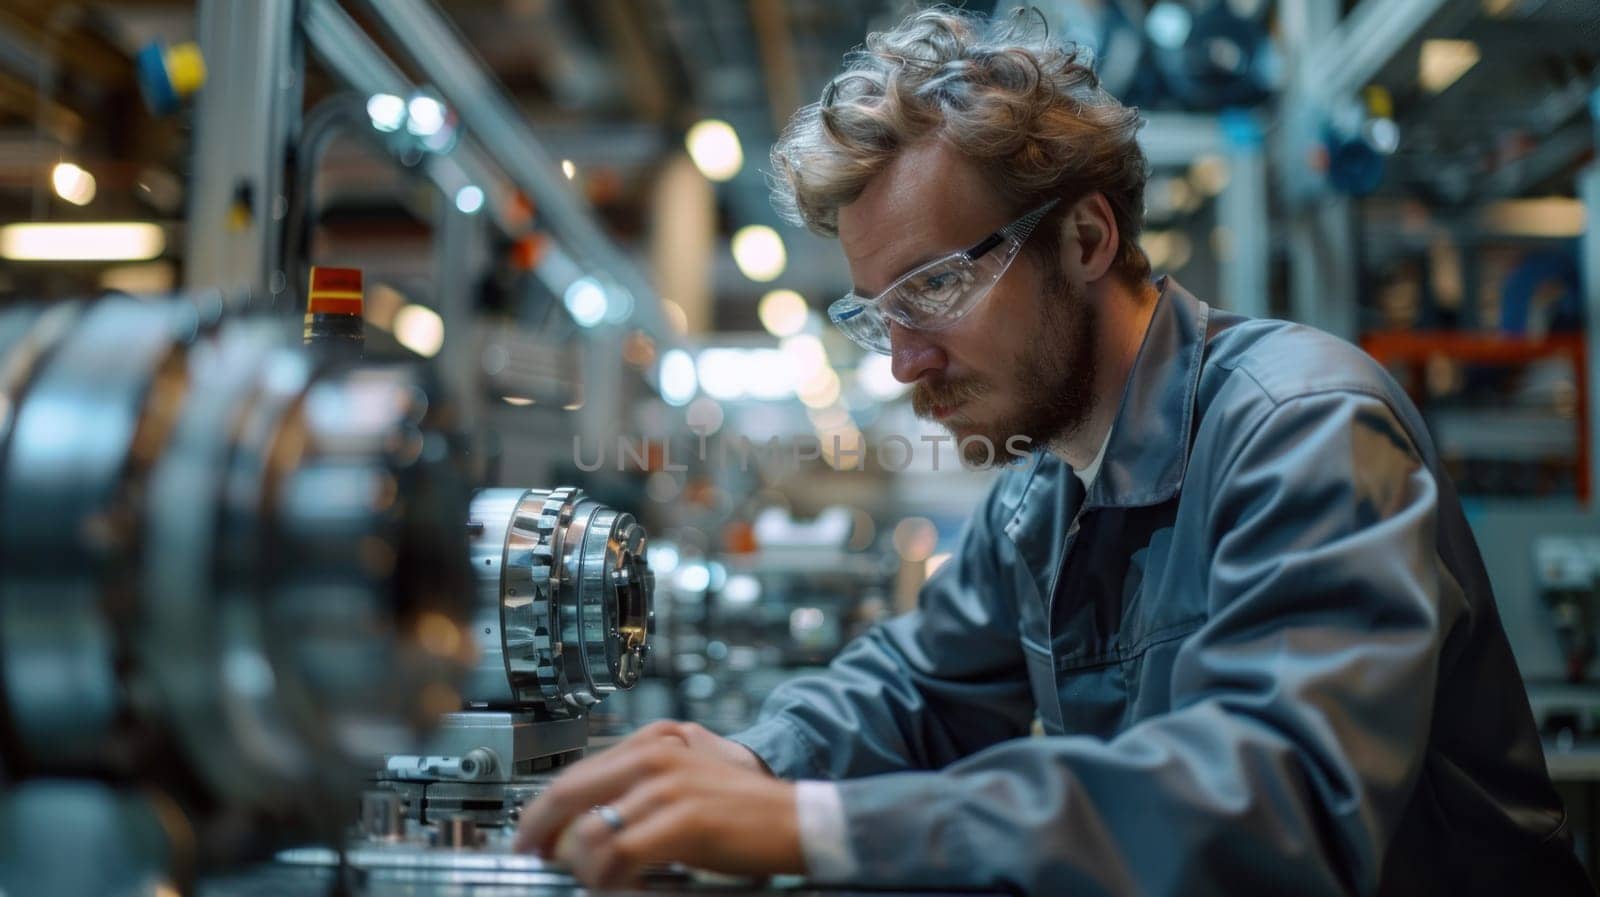 A man in industrial workwear focuses on repairing a machine in a busy factory setting.